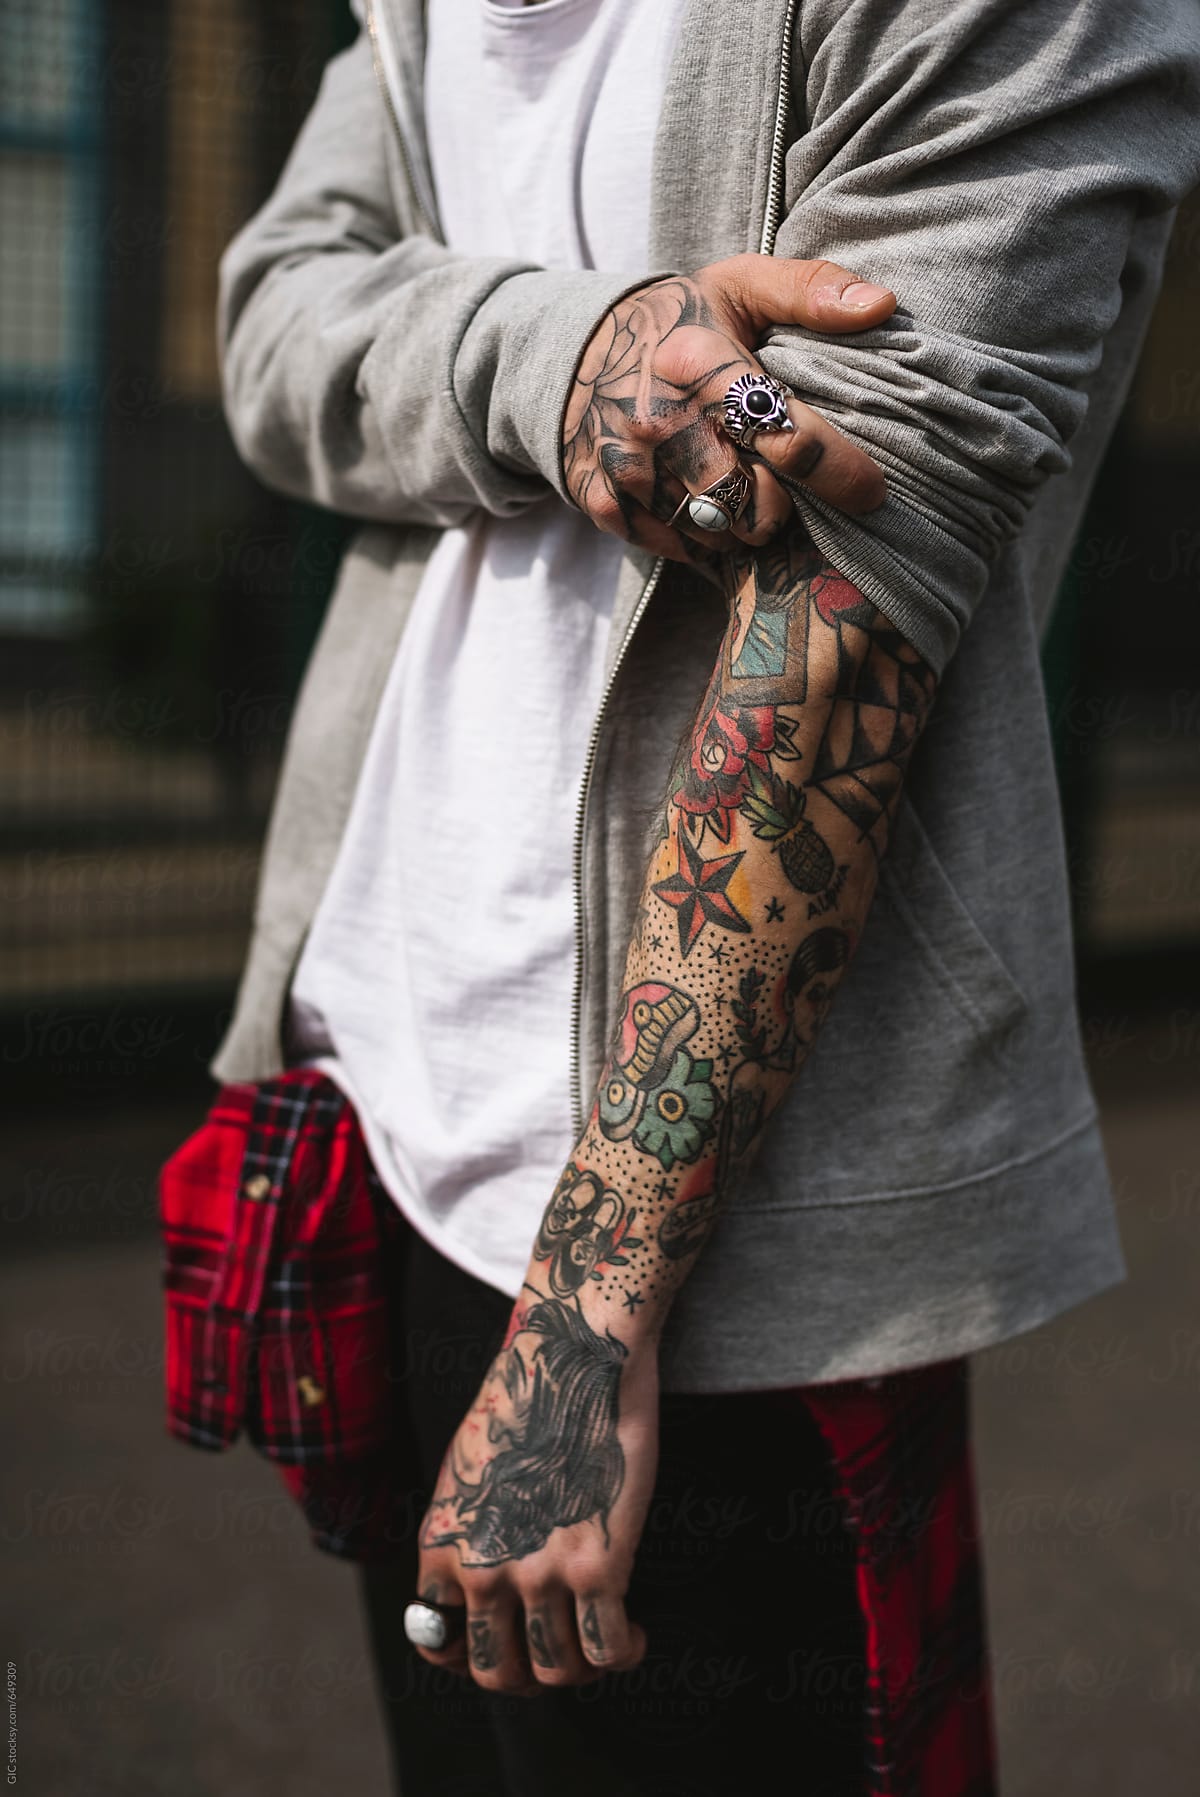 Man showing his tattooed arm